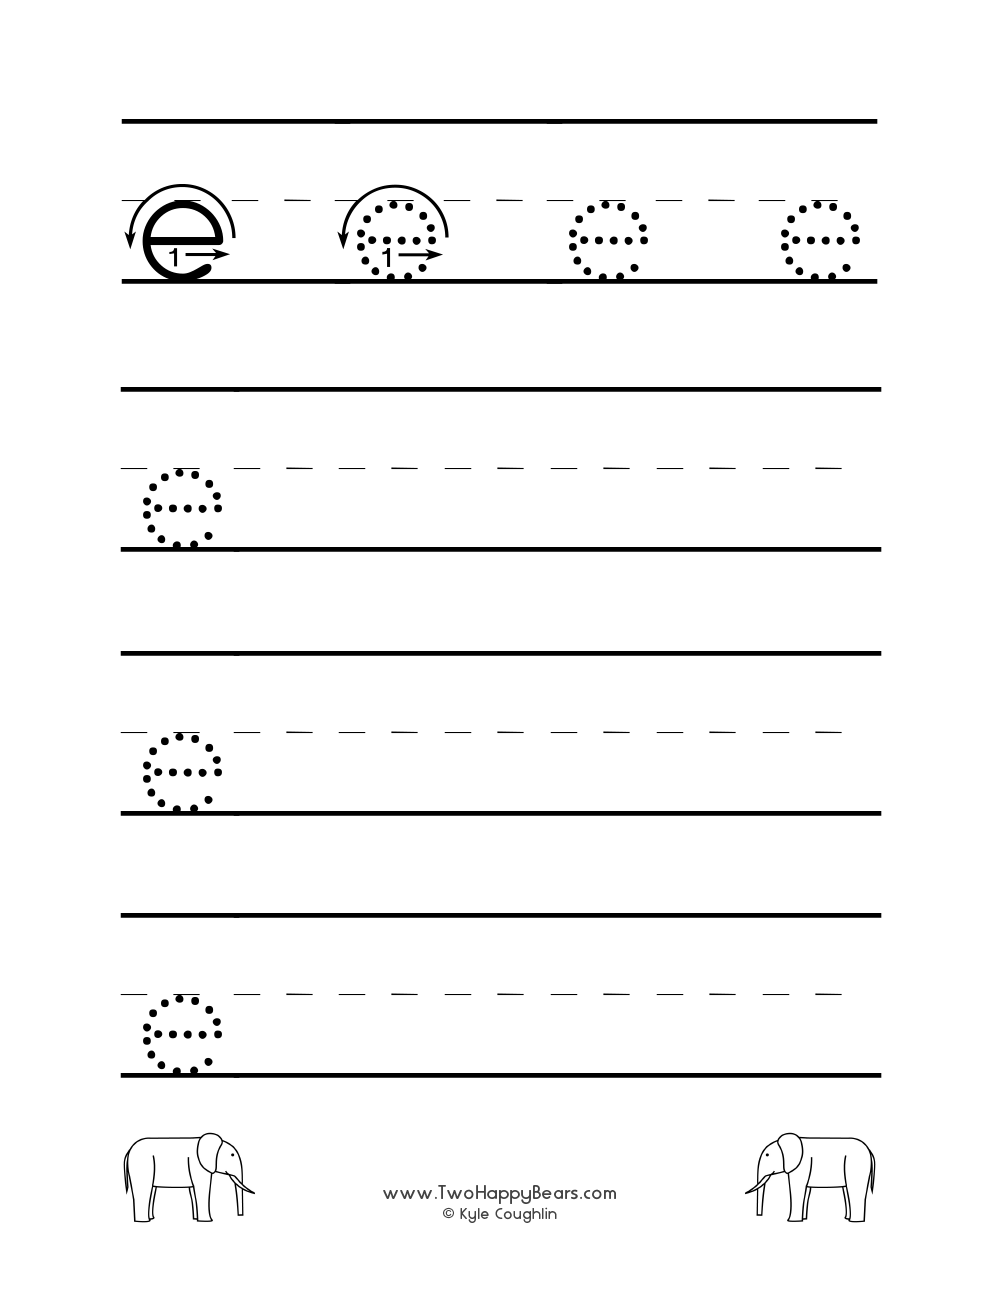 Worksheet for tracing and writing the lowercase letter E, in free printable PDF format.